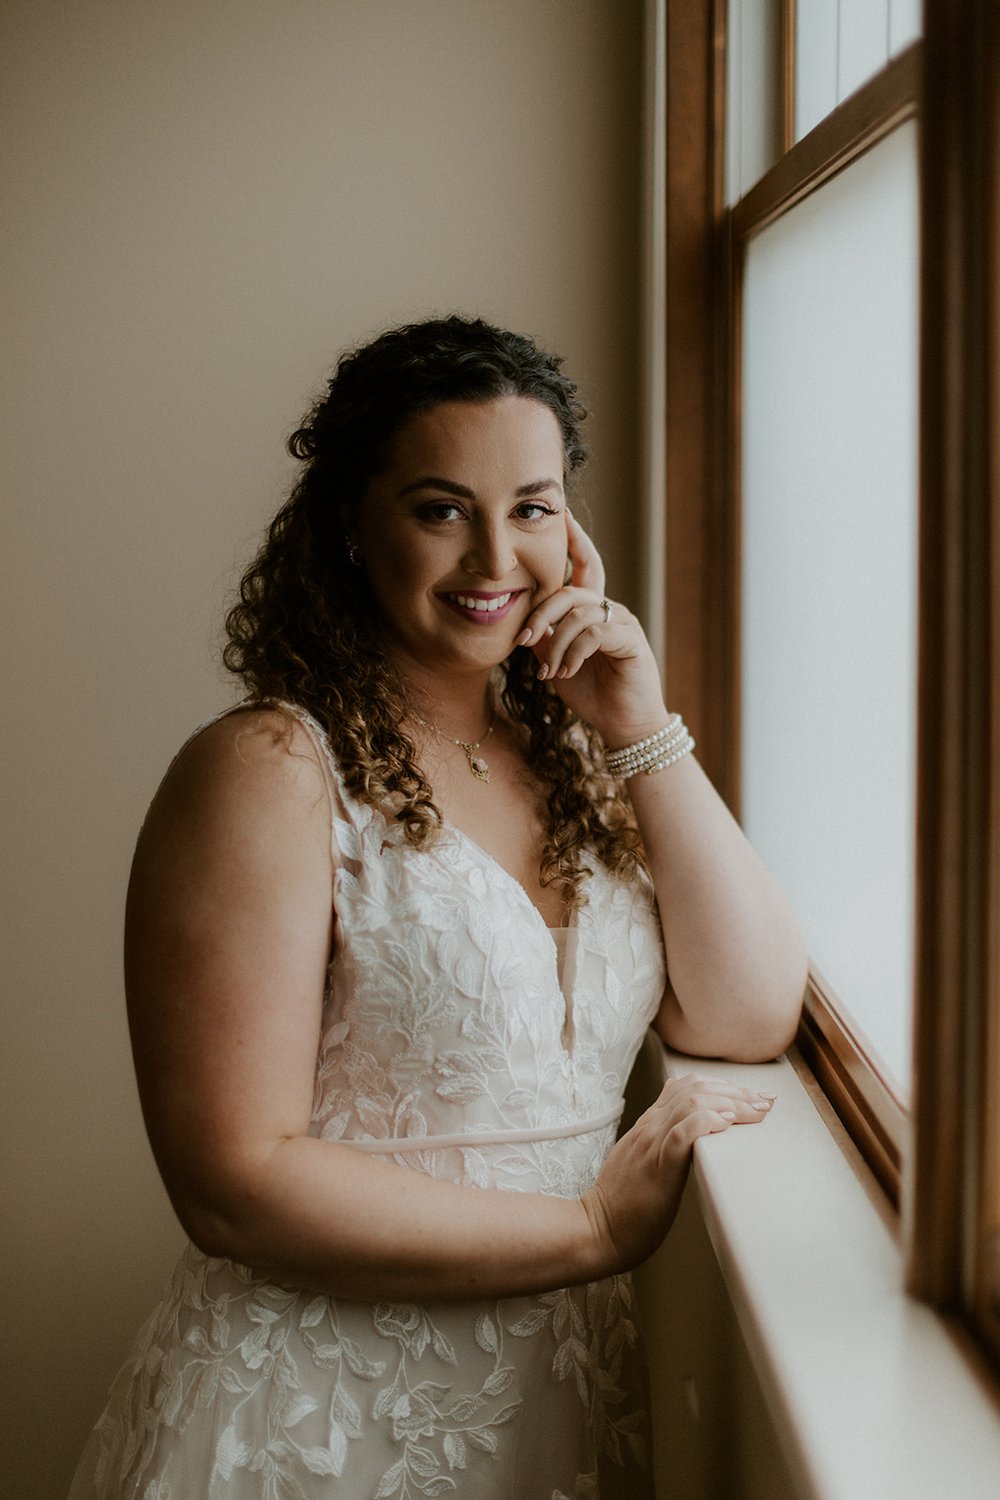 Bride stands at windowsill with a enchanting smile.  